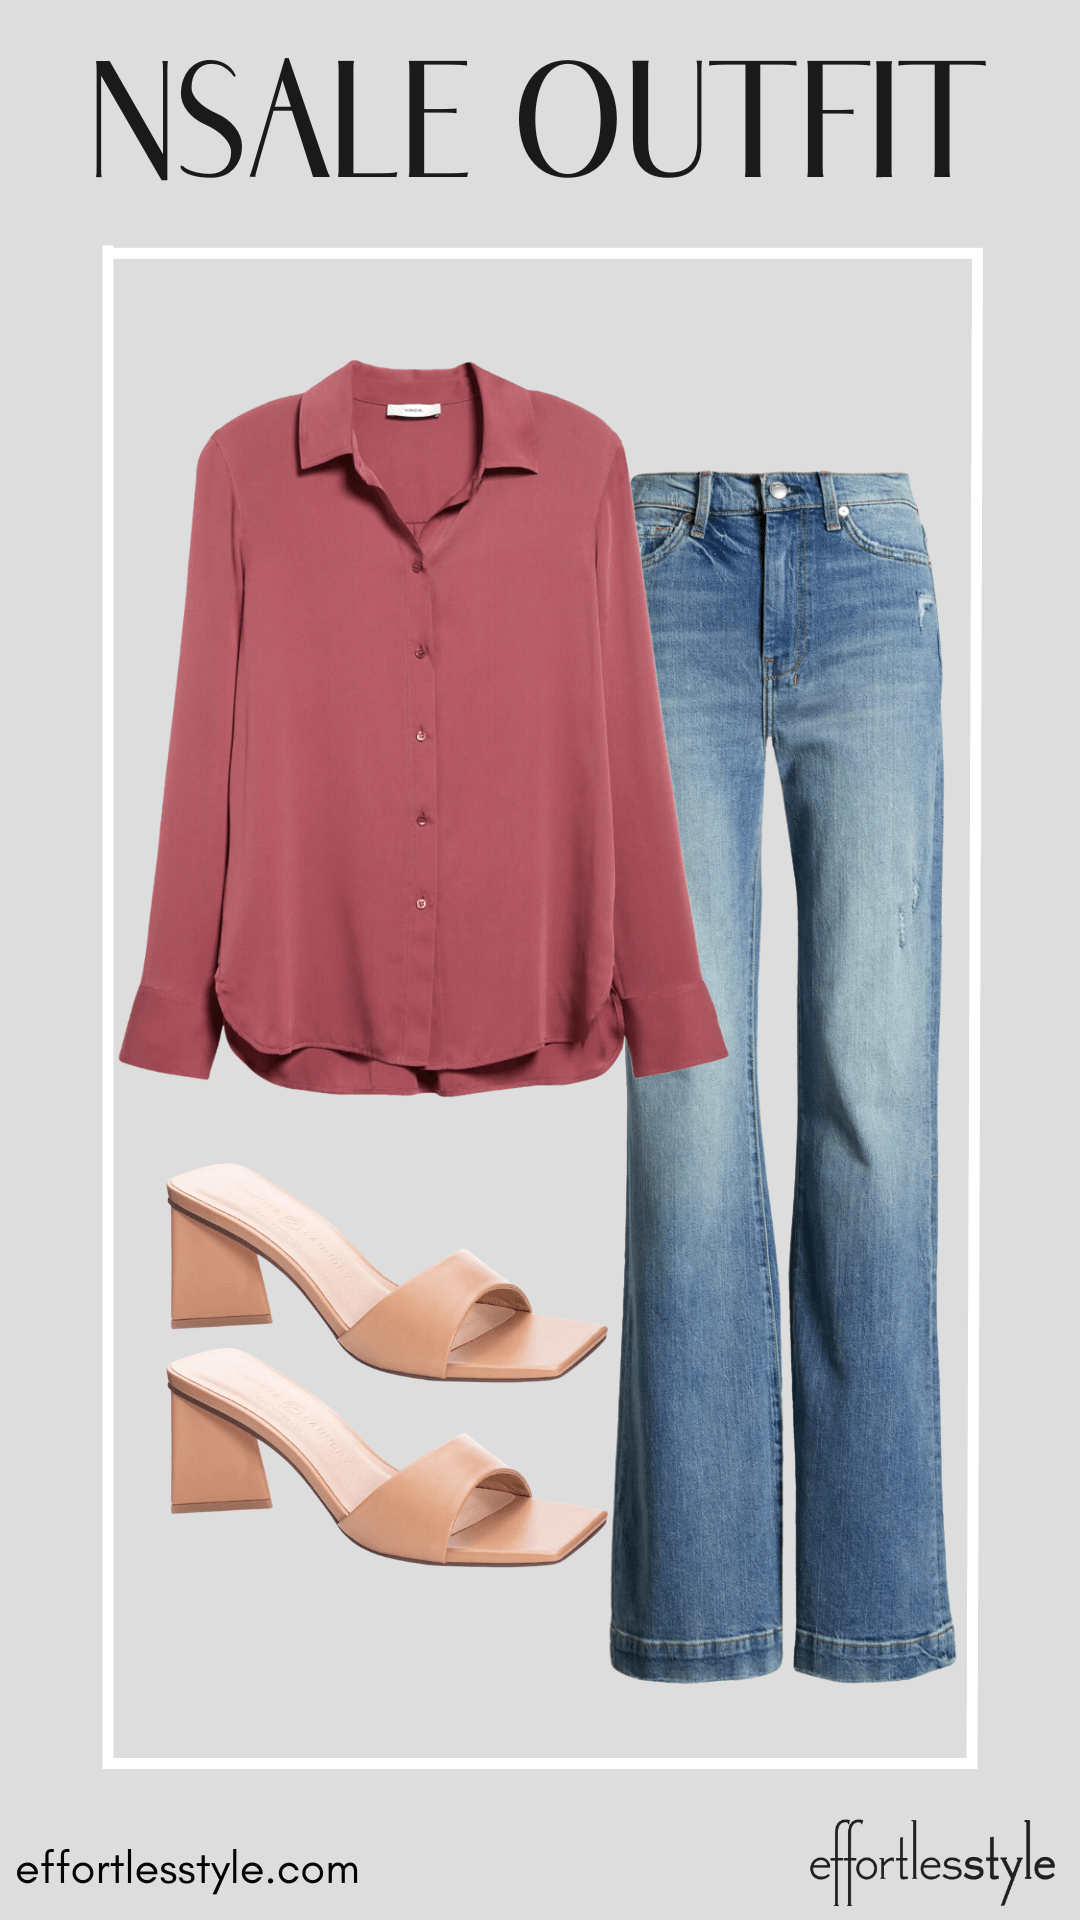 Slim Fit Stretch Silk Blouse & Medium Wash High Waist Flare Leg Jeans how to wear jeans to the office how to style jeans for the office how to dress jeans up for the office how to wear jeans in a professional setting